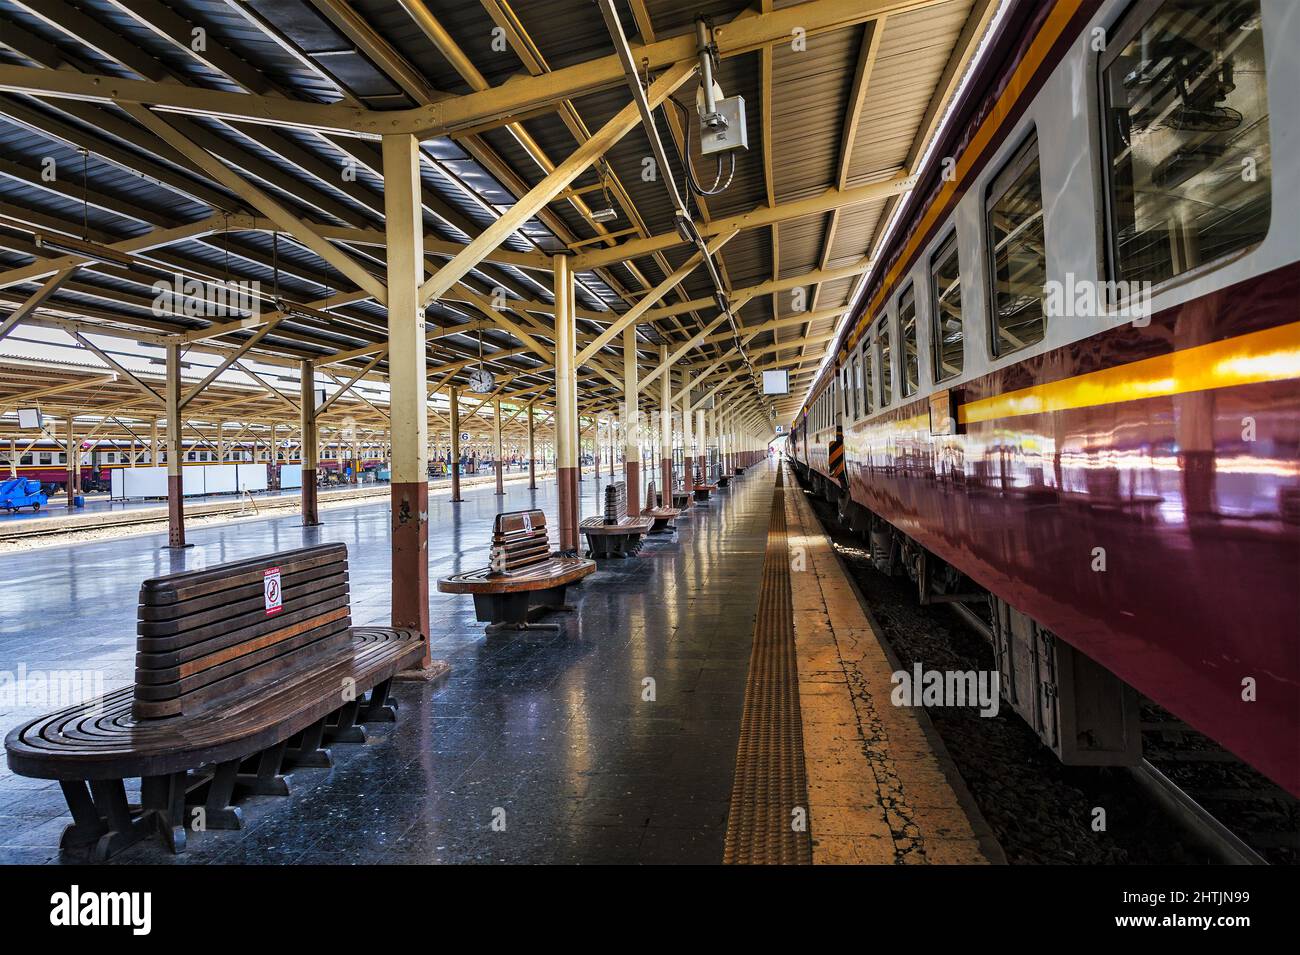 Bangkok Train Station – March 20, 2021: View of station platform during quiet hour. The station is also known as Hua Lamphong Station. Stock Photo